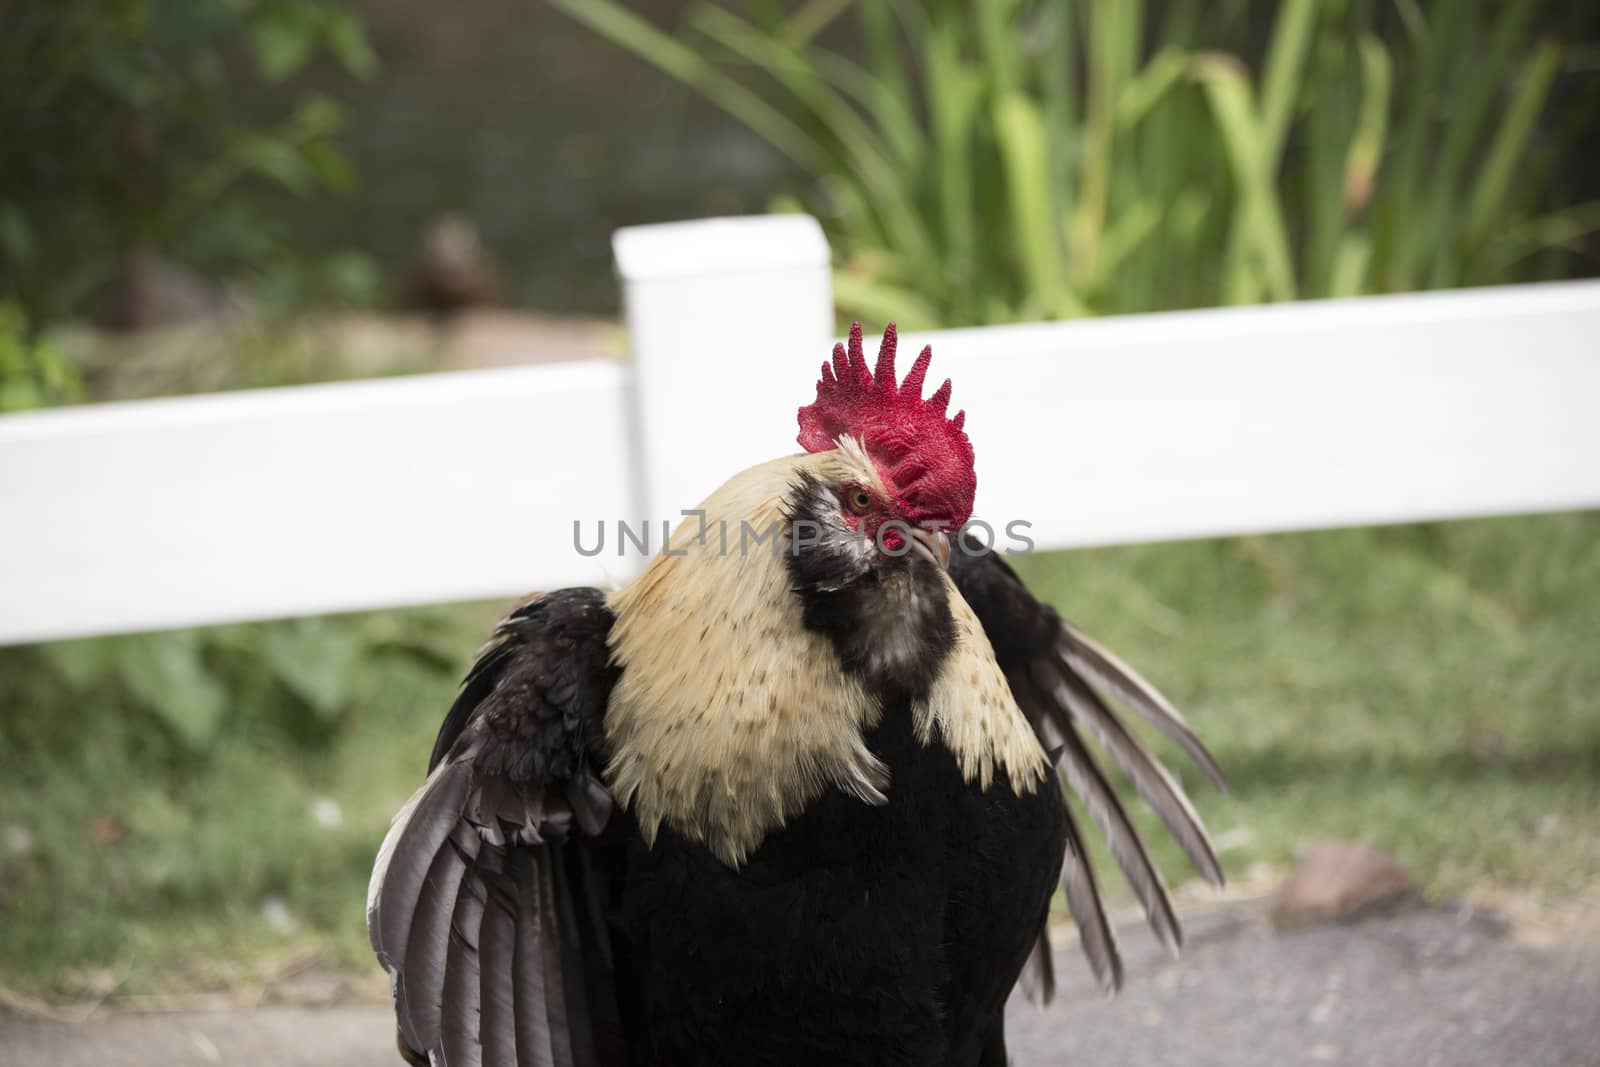 Faverolle rooster in aggression display